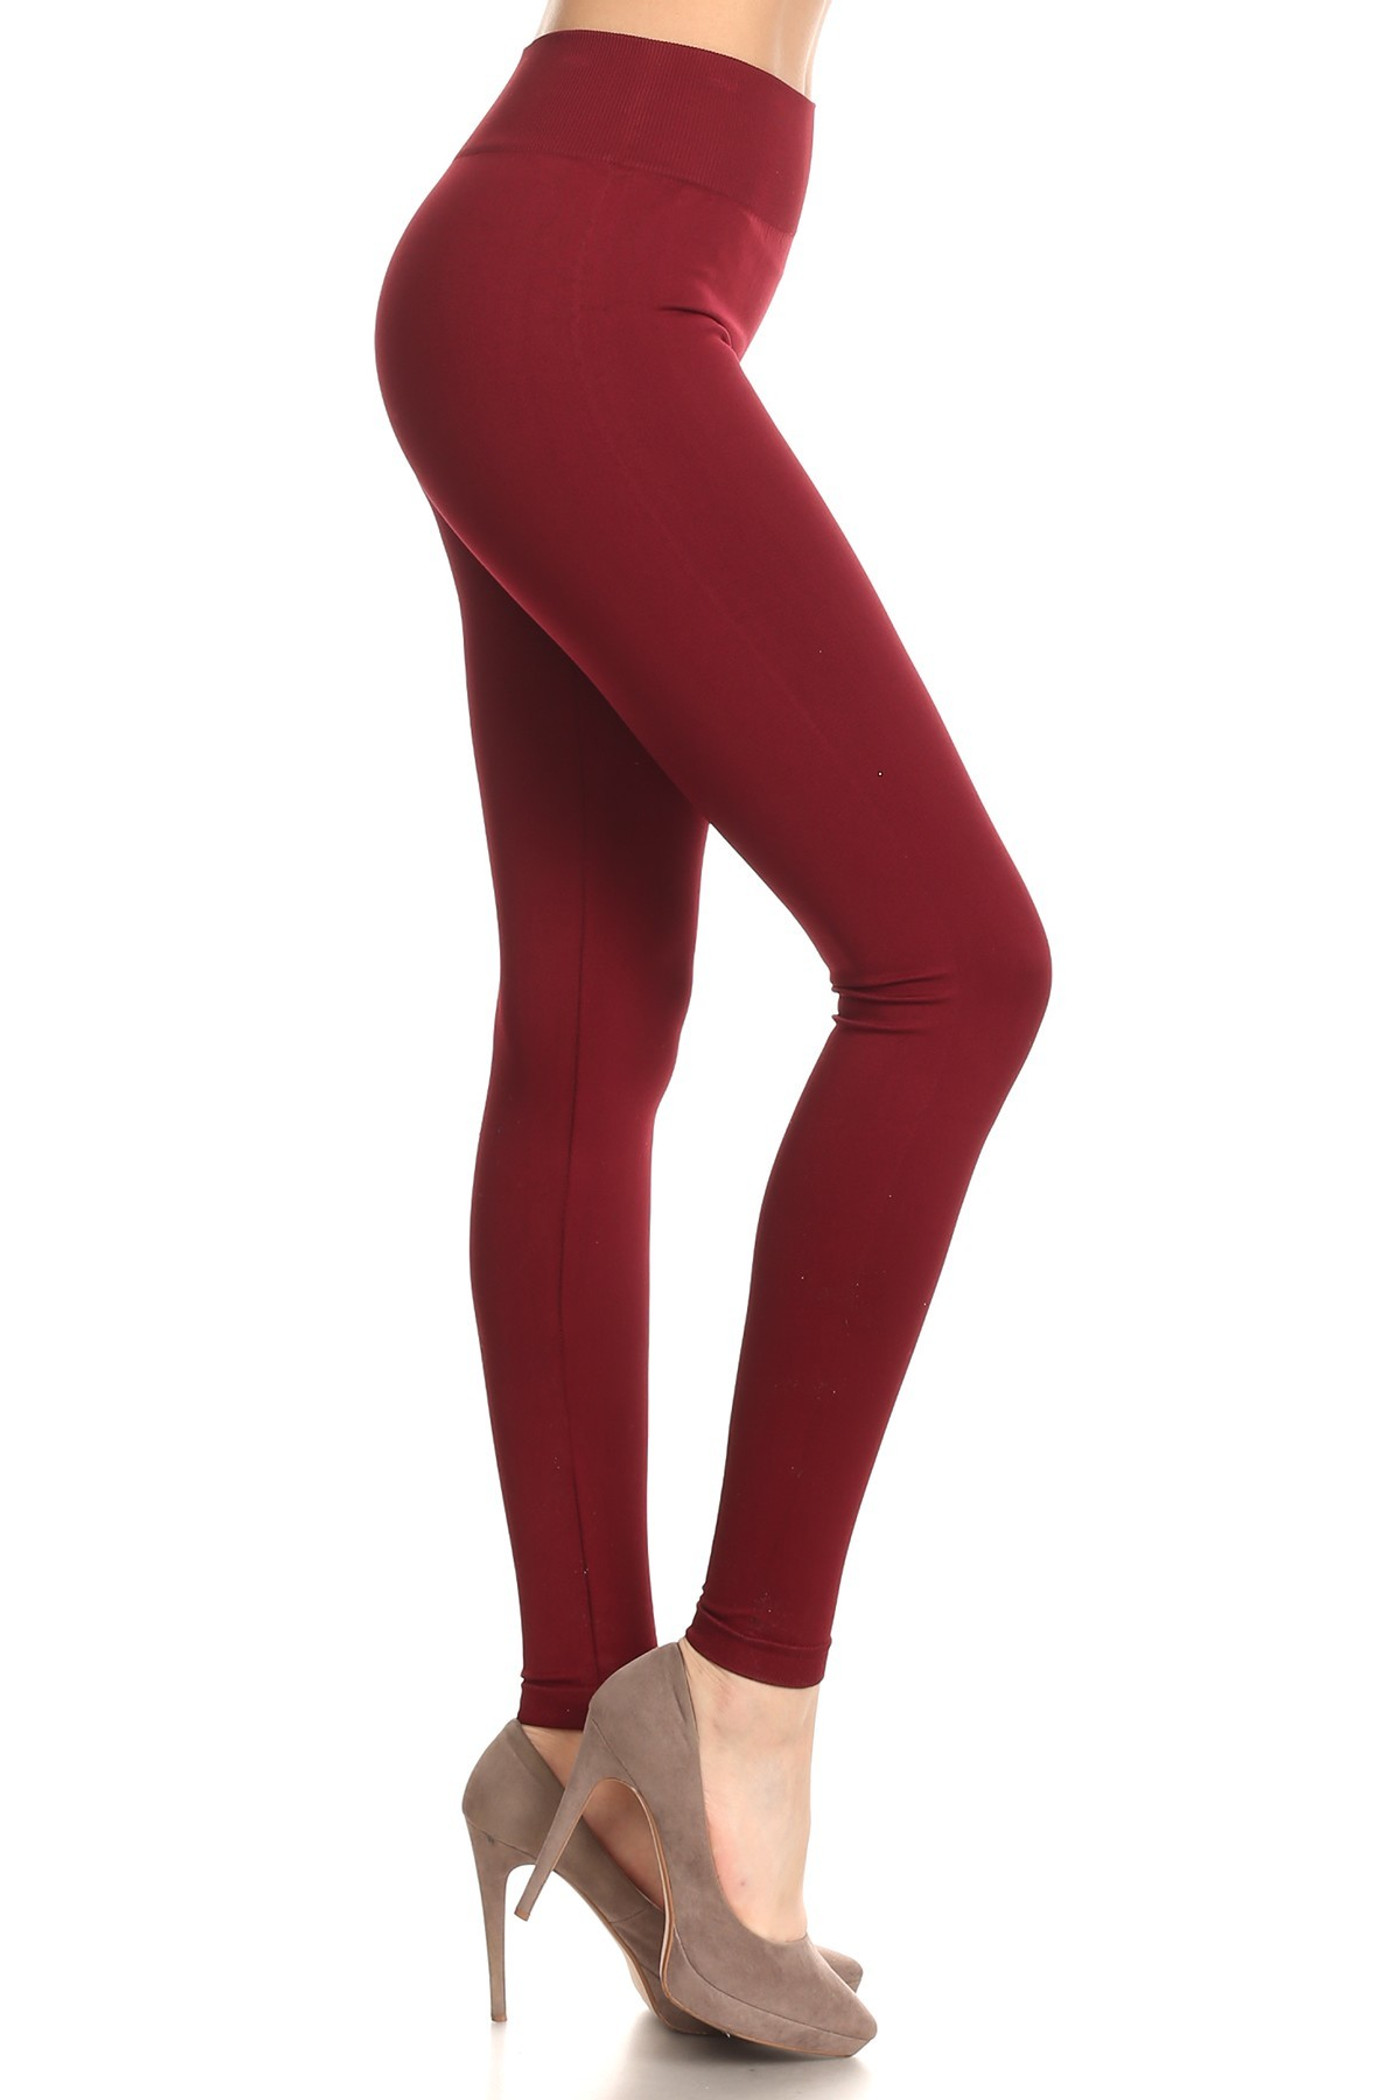 Buttery Smooth Basic Solid Extra Plus Size Leggings - 3X-5X - USA Fashion